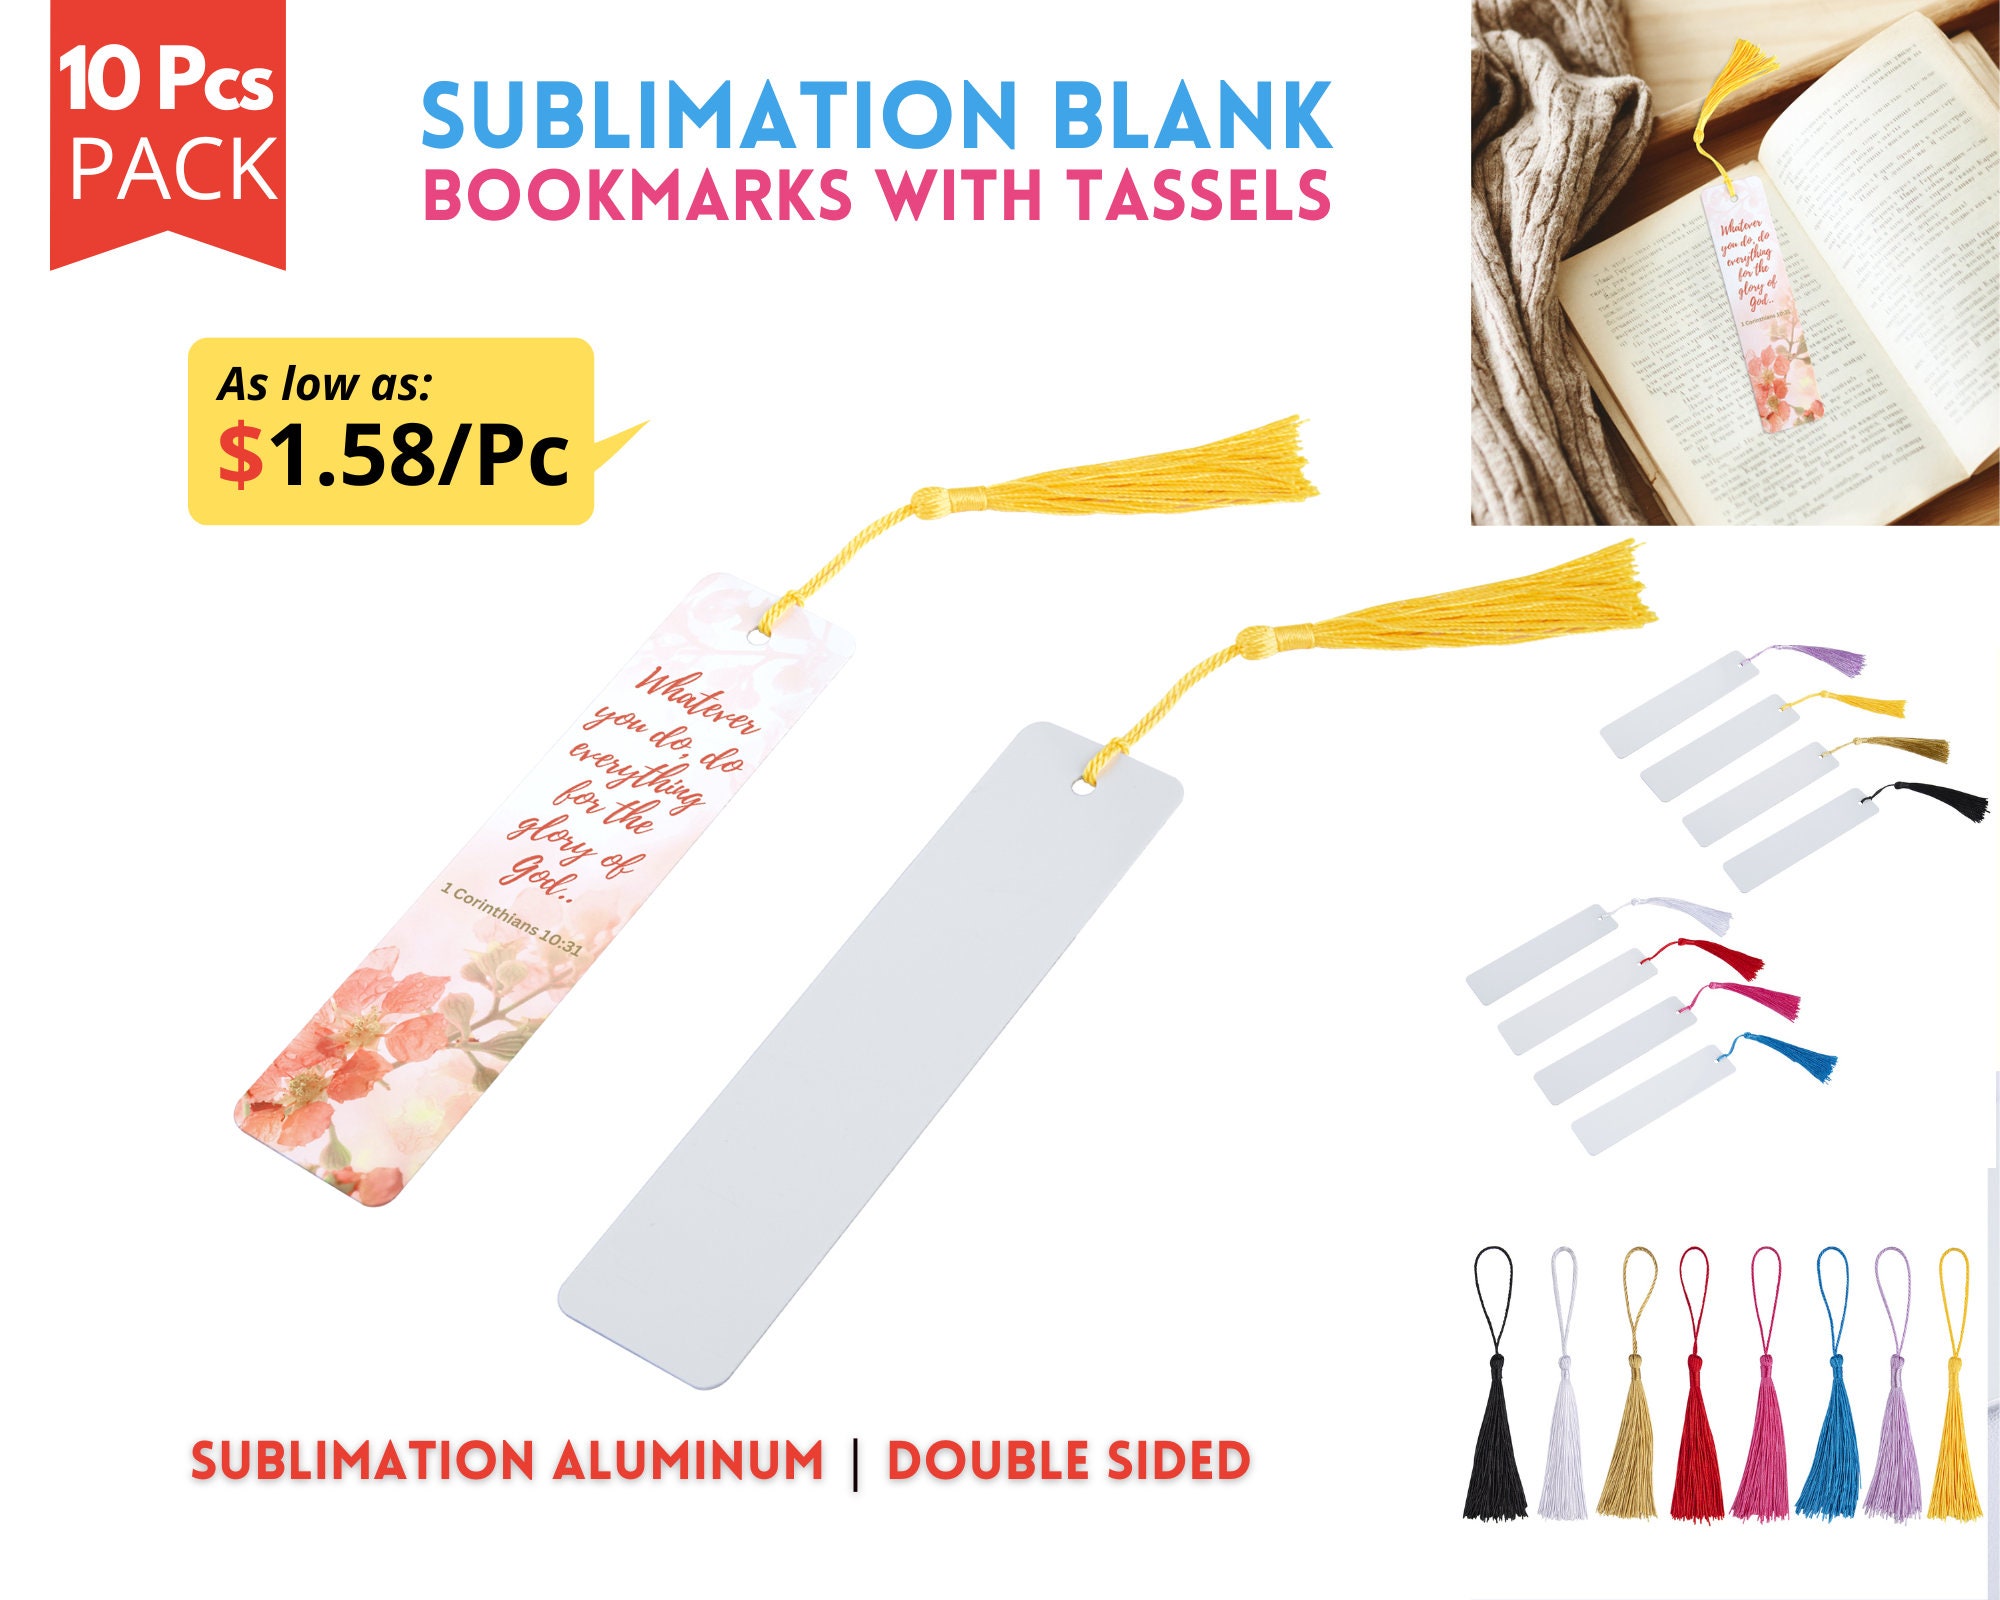 Try This: Sublimate Bookmarks